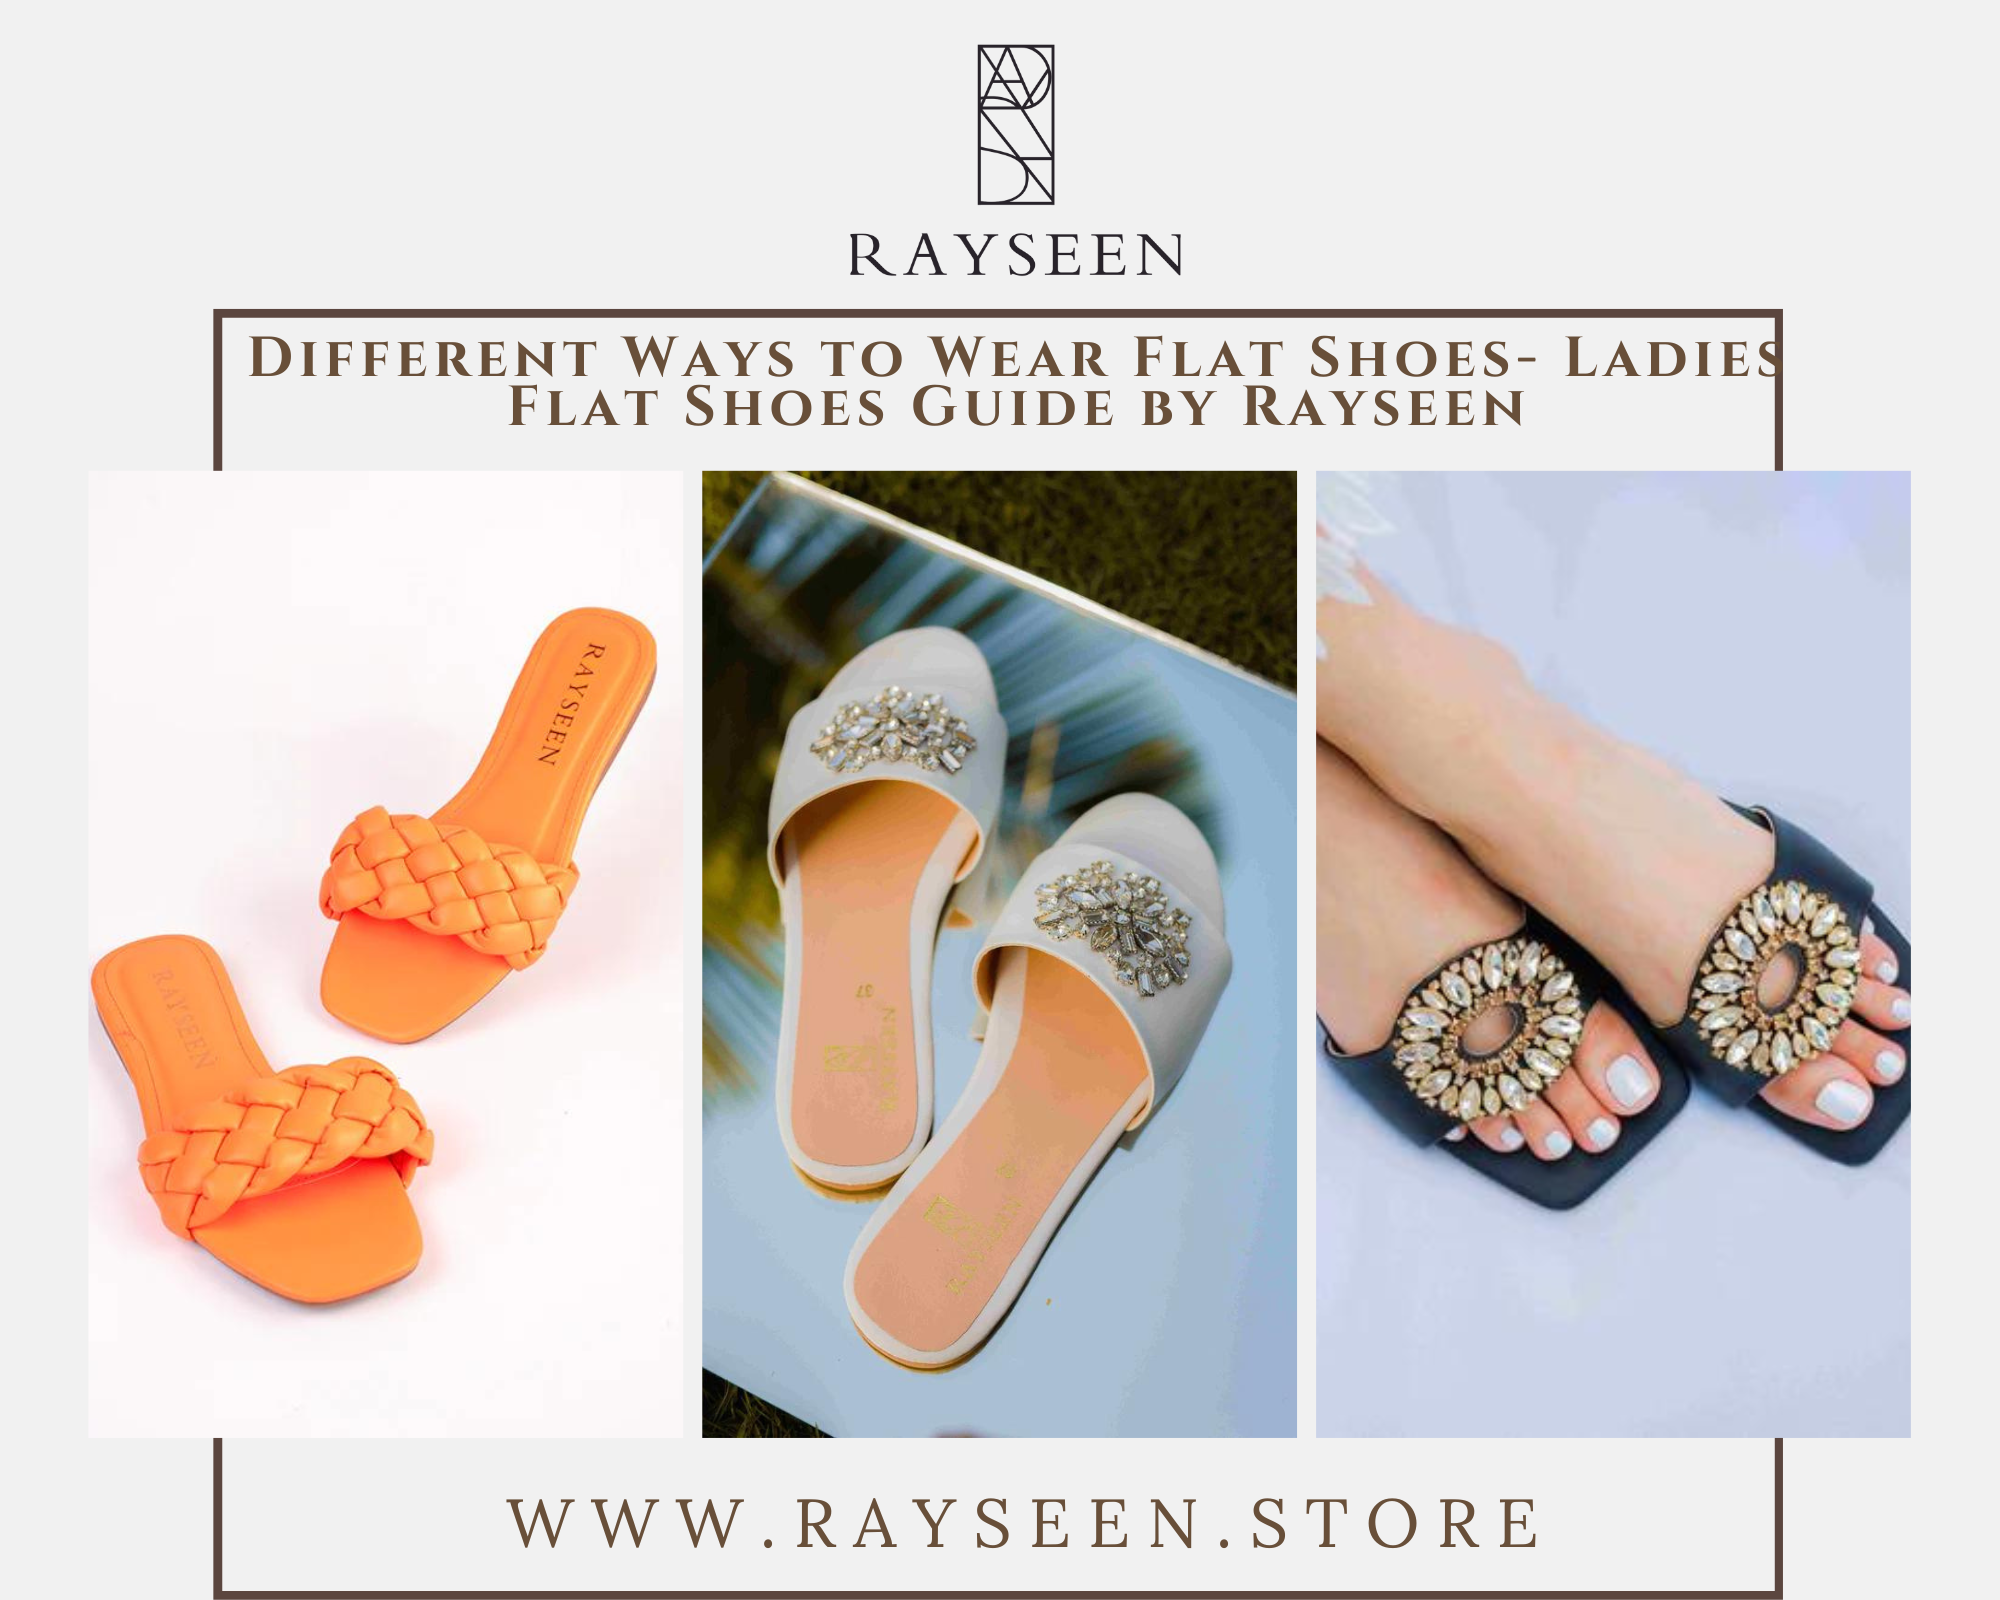 Different Ways to Wear Flat Shoes- Ladies Flat Shoes Guide by Rayseen